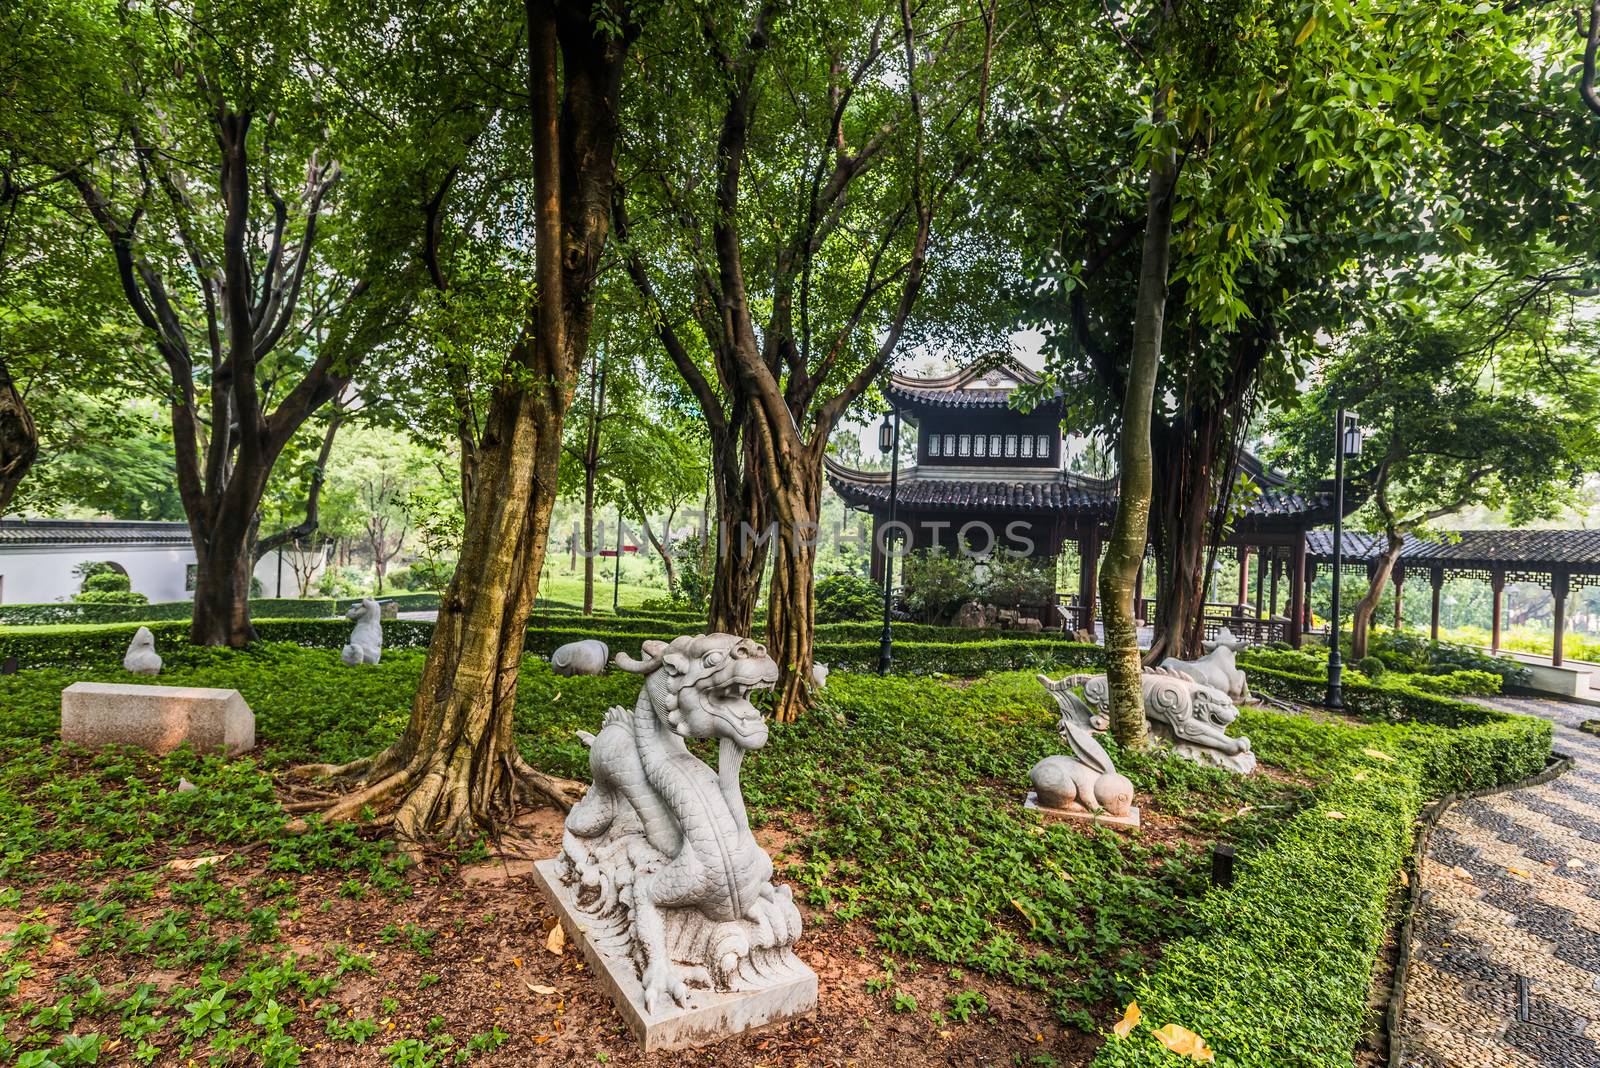 Chinese Zodiac garden statues Kowloon Walled City Park in Hong Kong